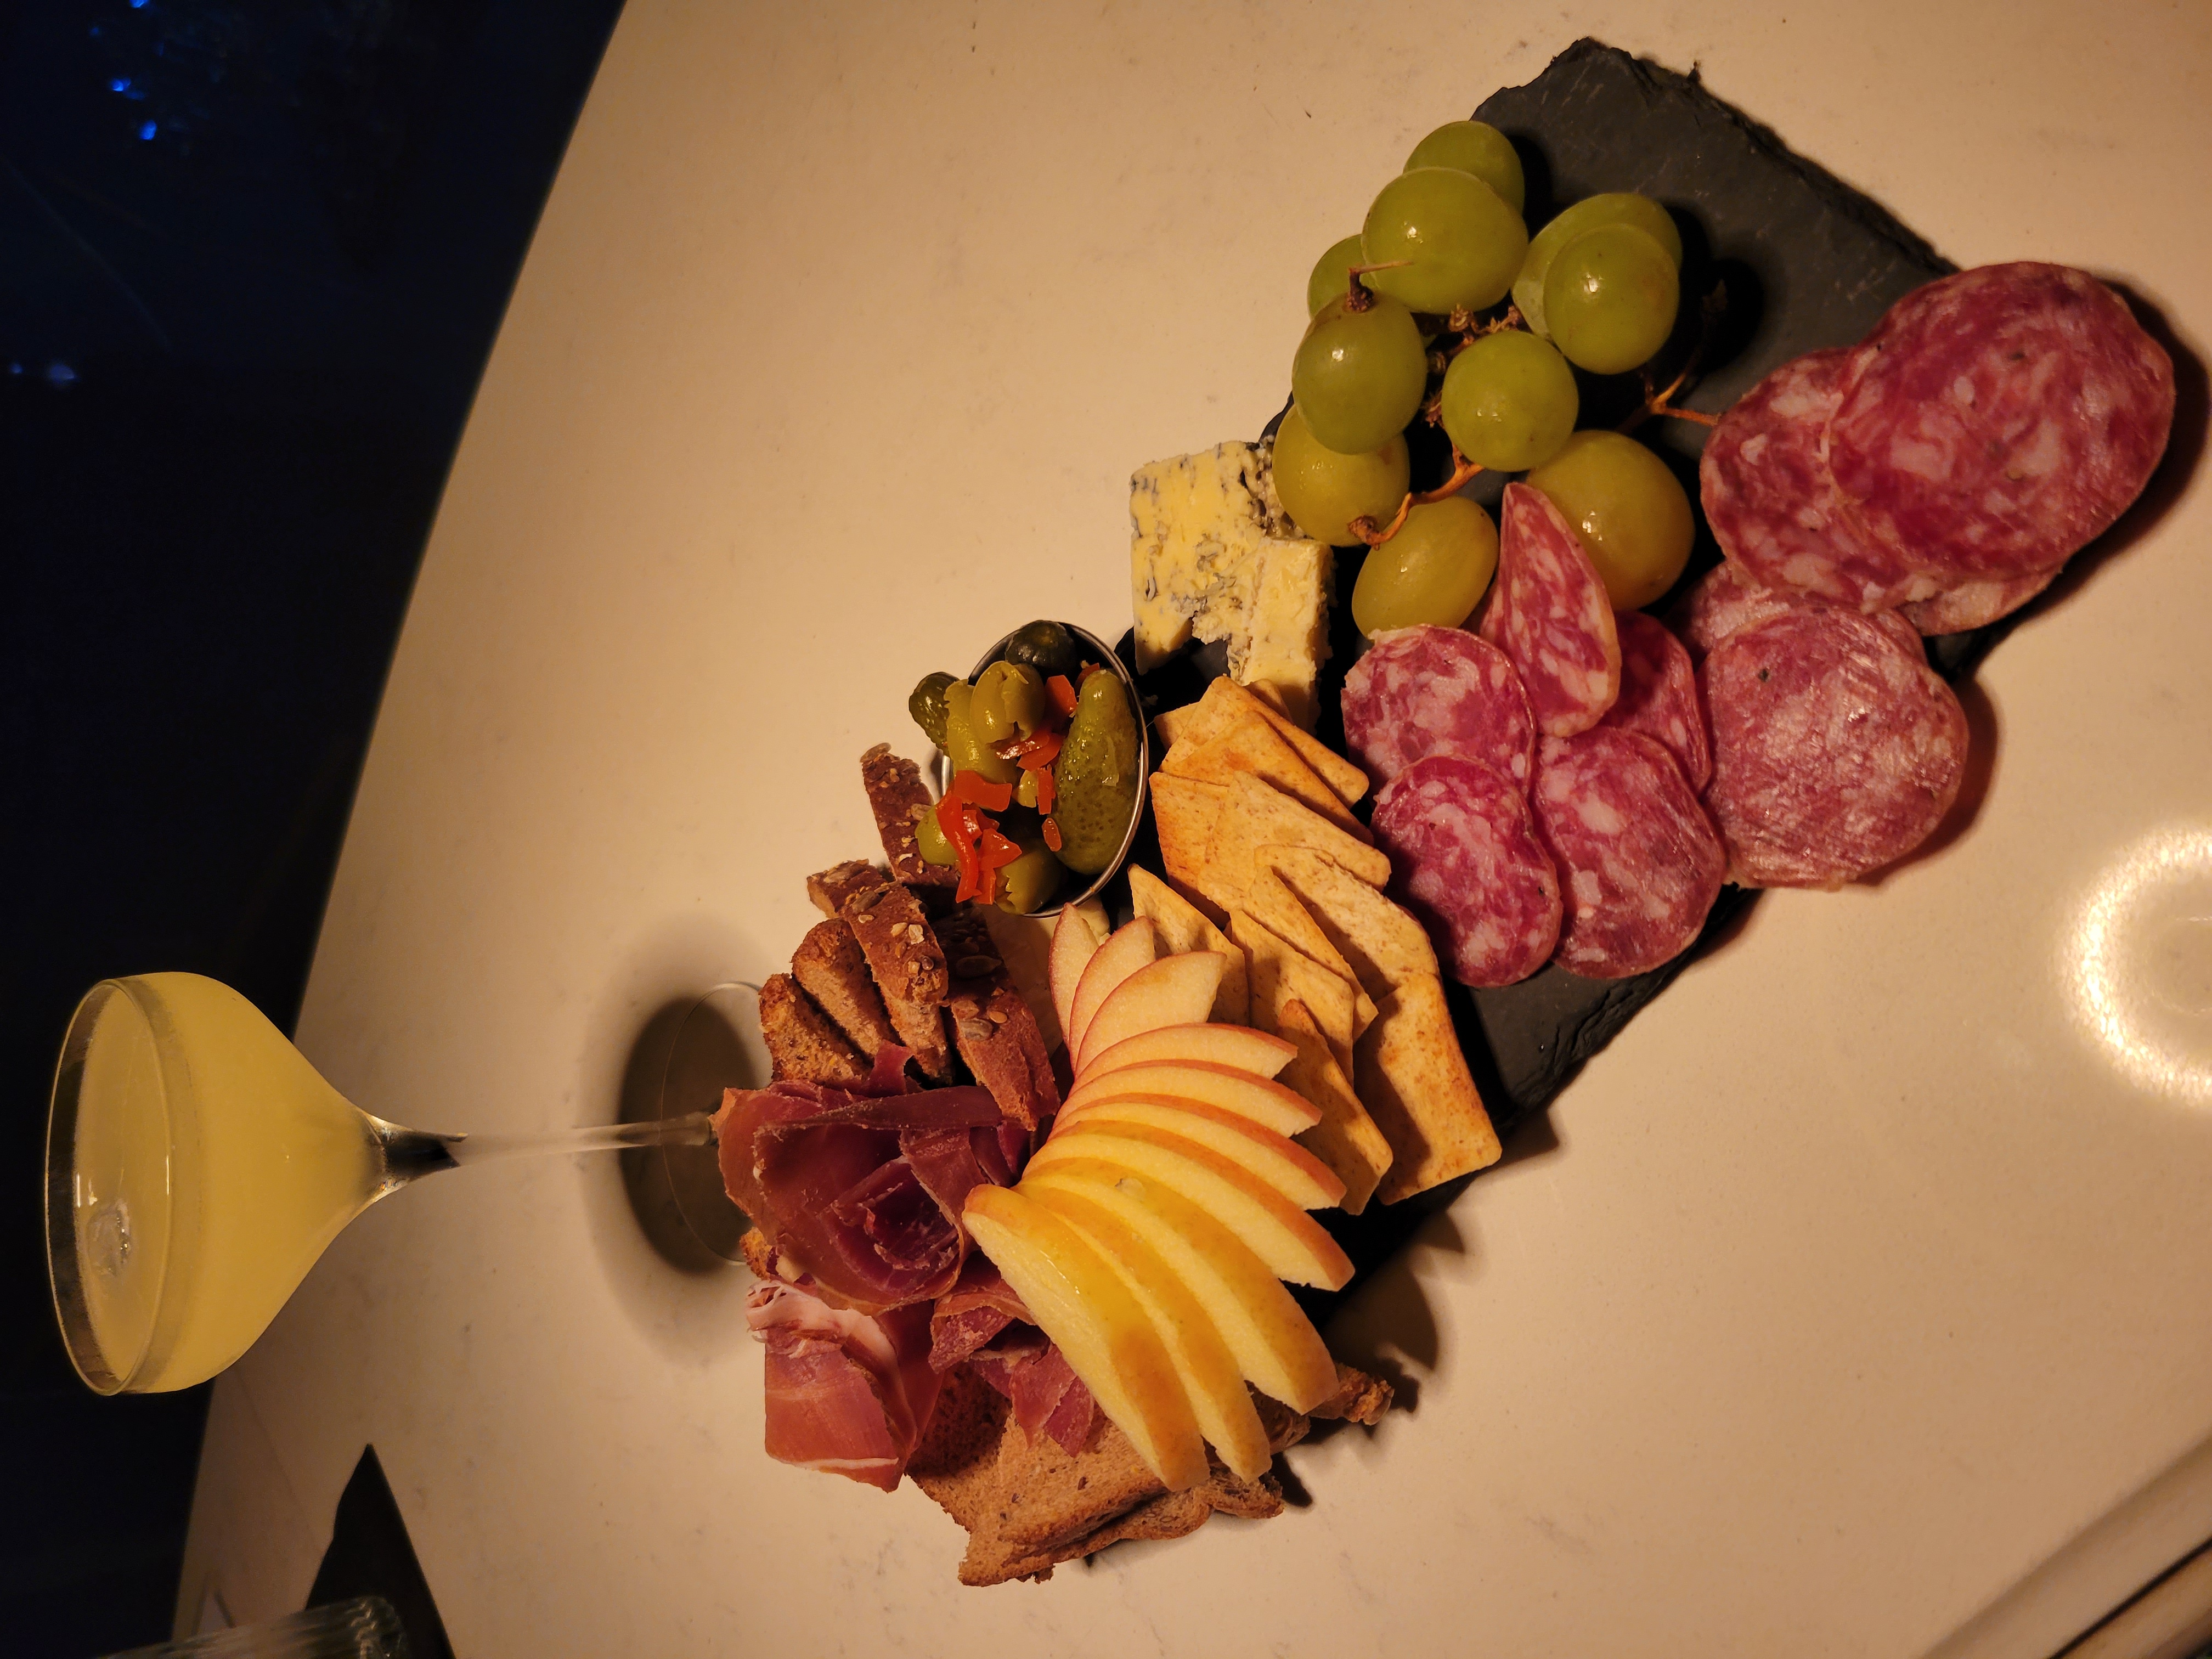 A plate of cheese and meats and a cocktail